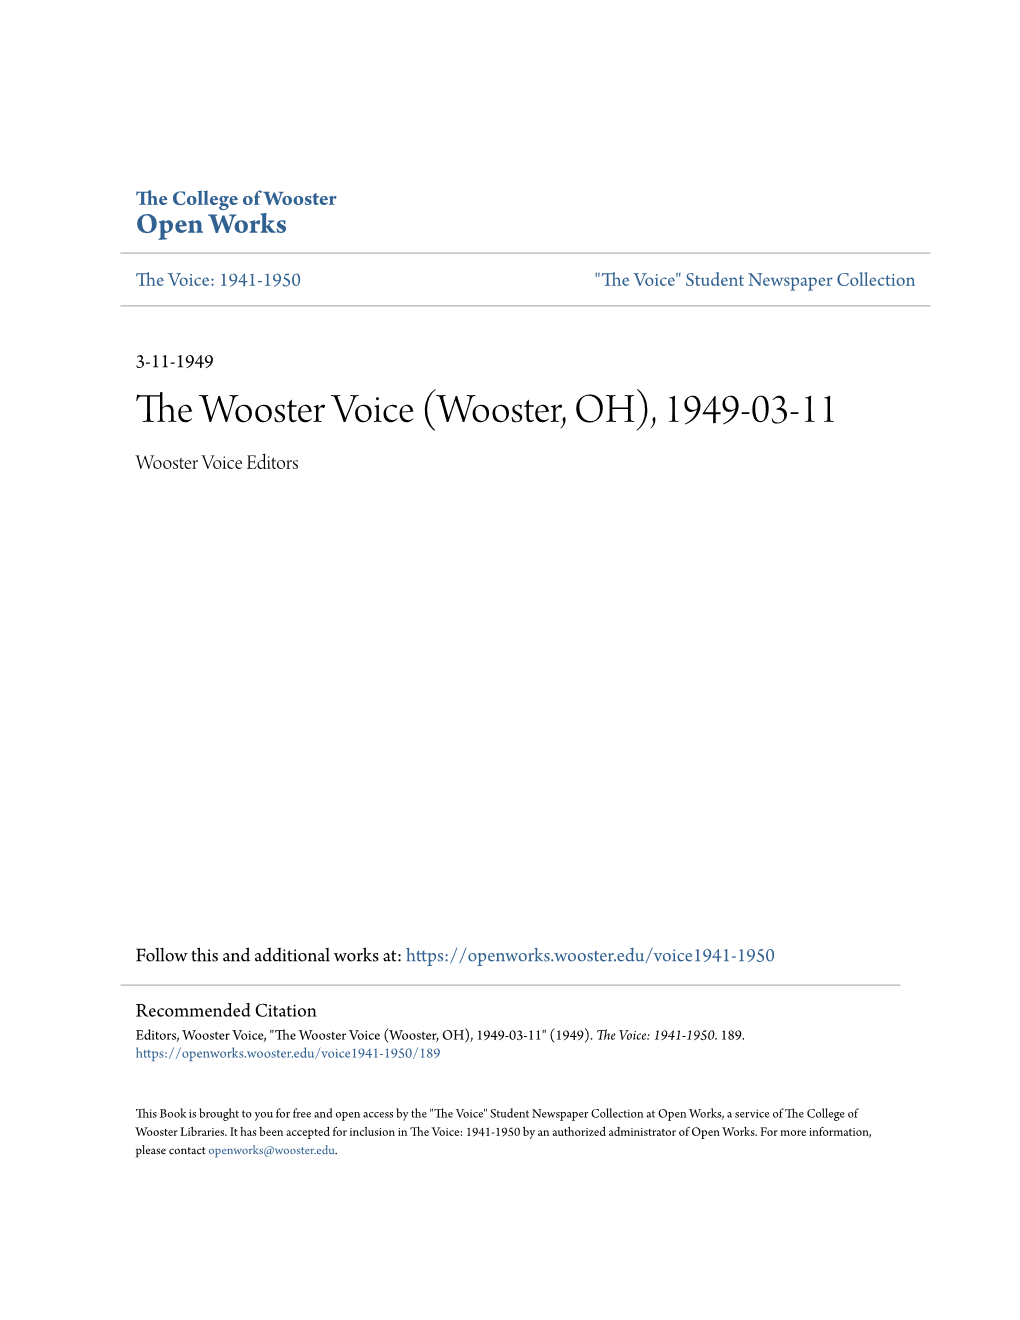 Wooster, OH), 1949-03-11 Wooster Voice Editors